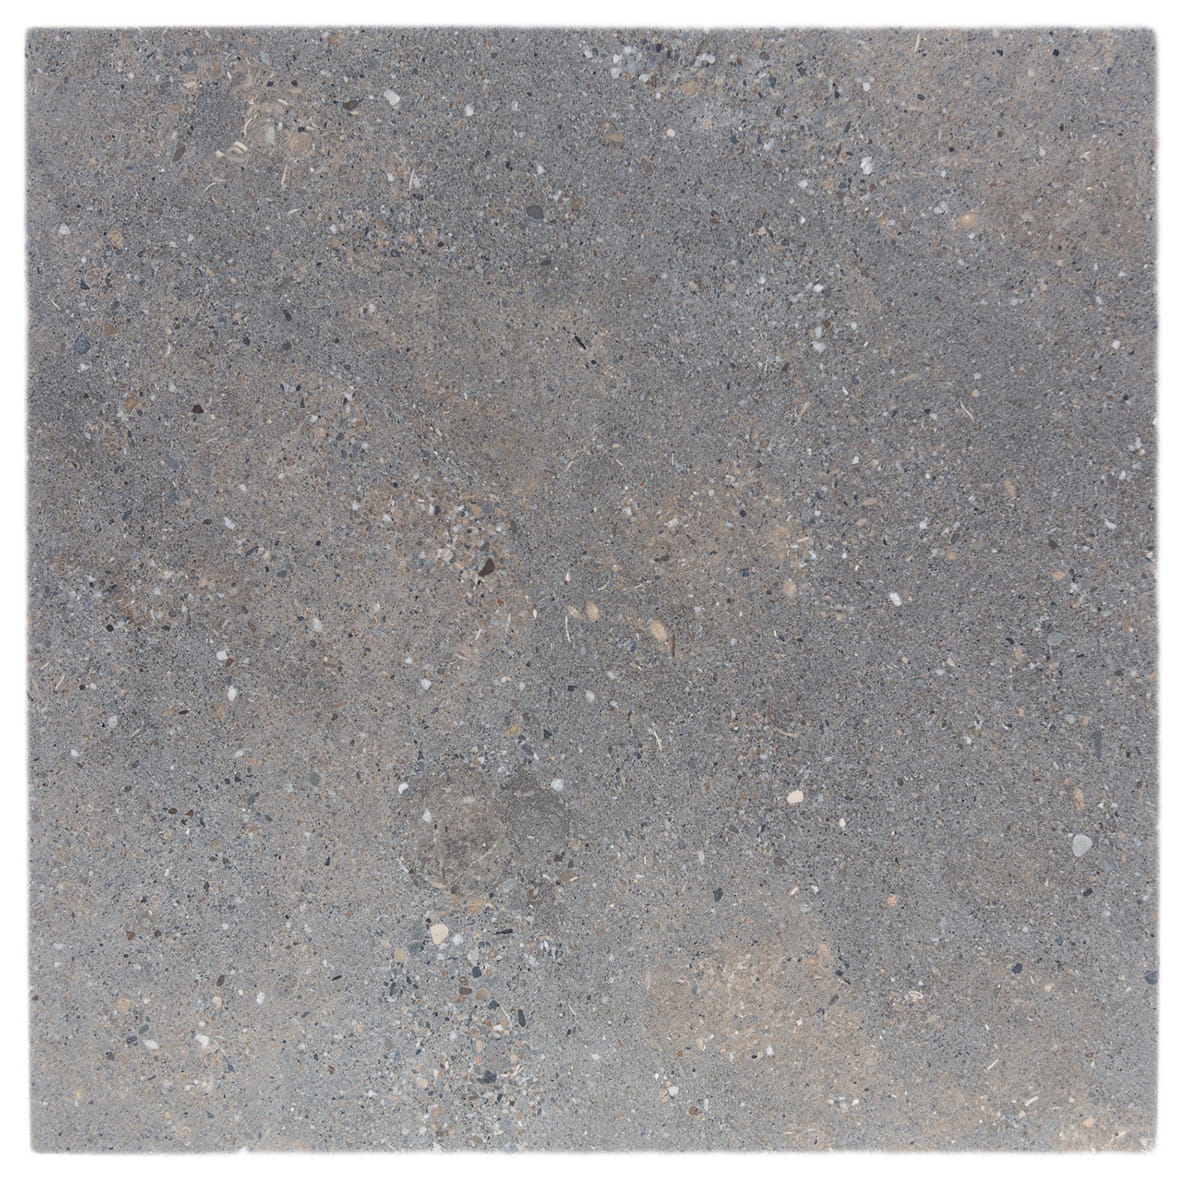 Argent collection limestone field tiles with honed finish, 18x18x0.375 inches, suitable for residential and commercial flooring.